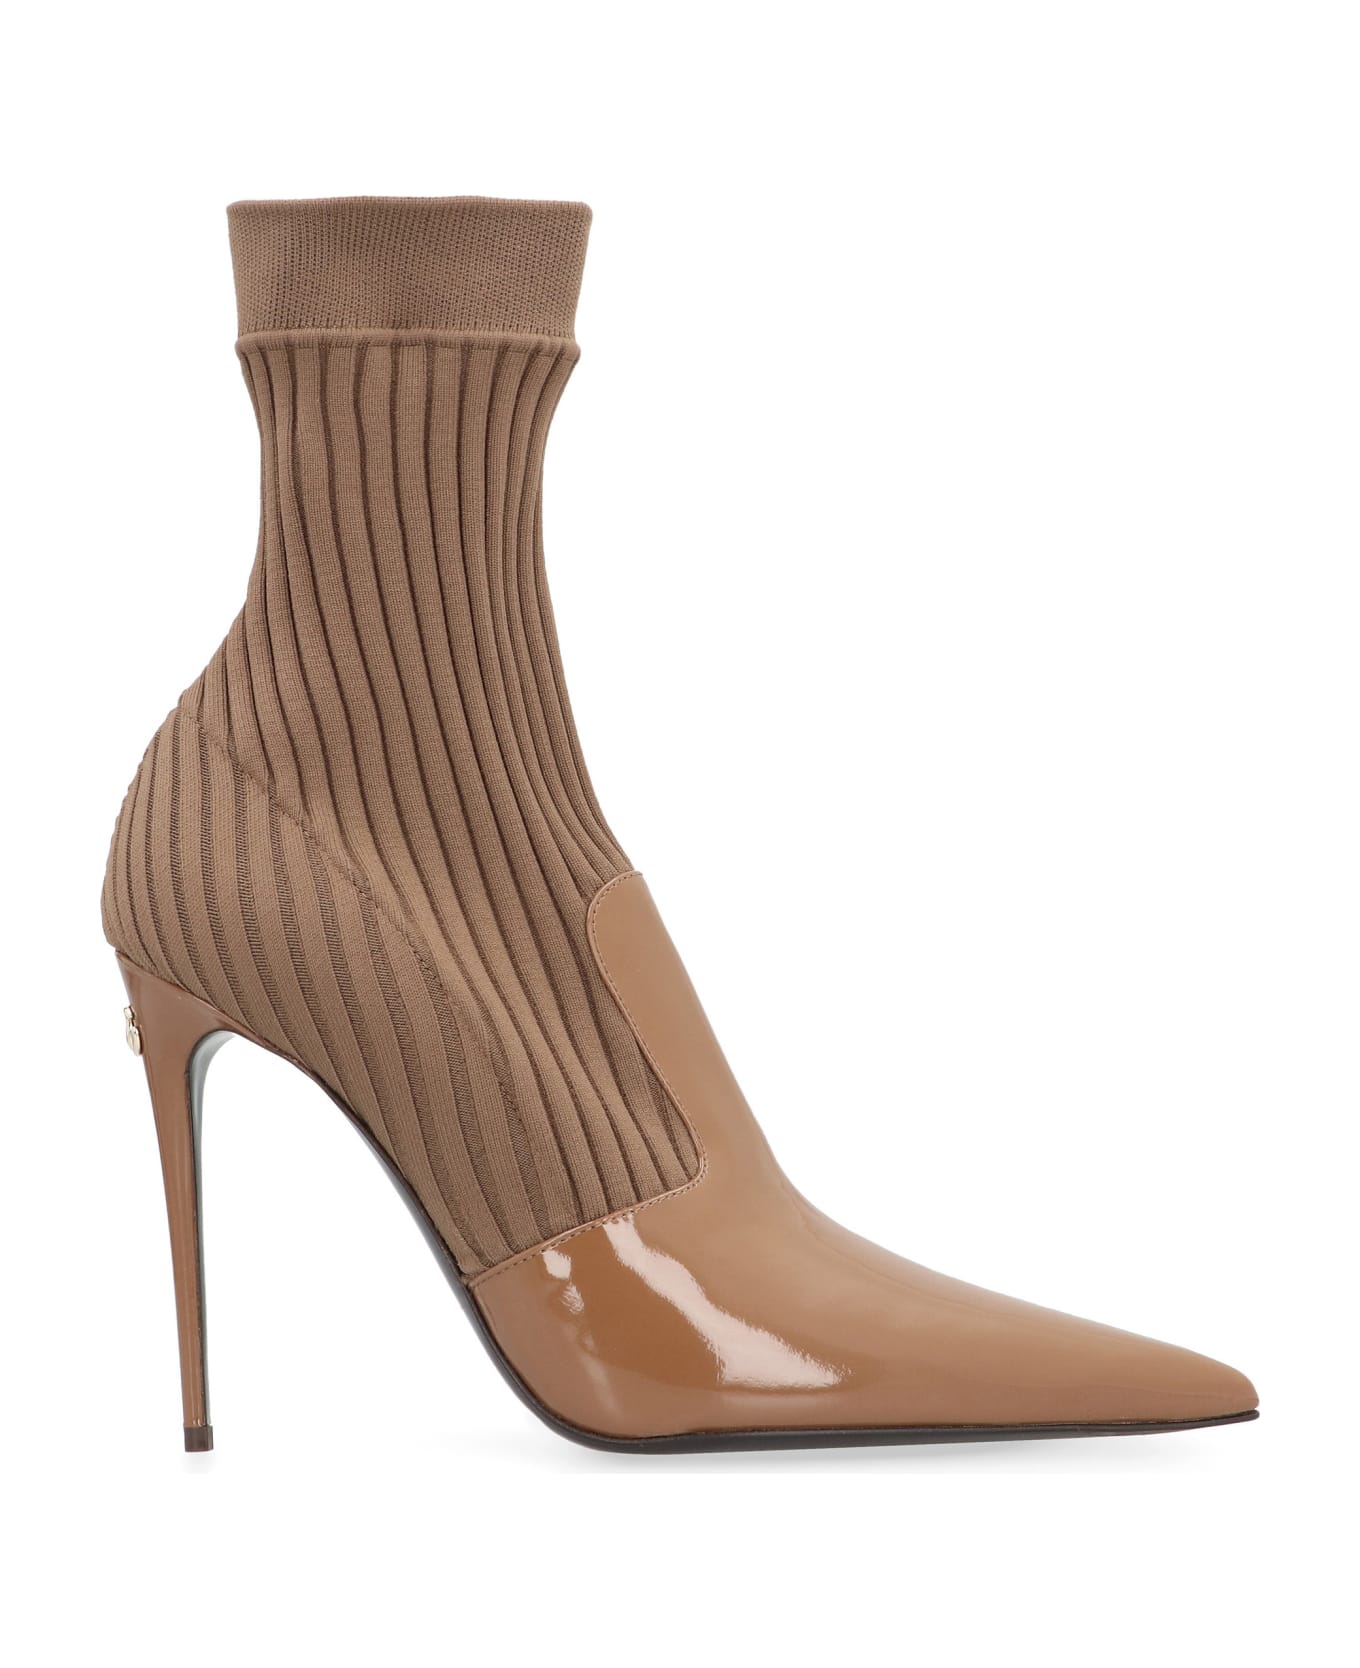 Dolce & Gabbana Sock Ankle Boots - Camel ハイヒール